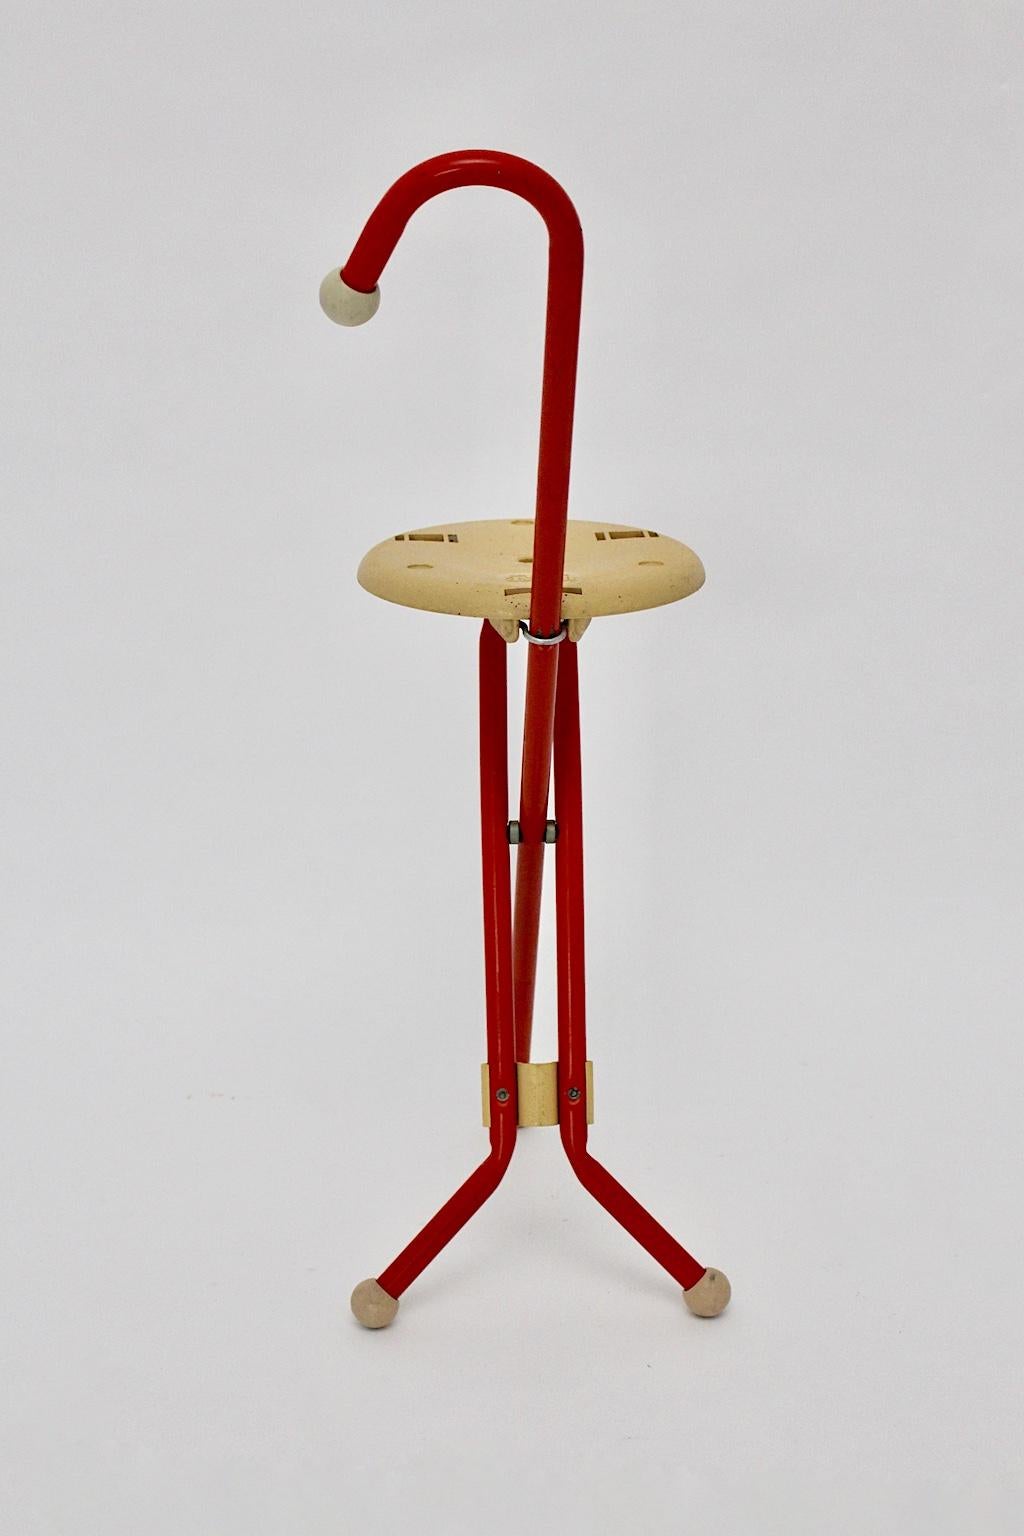 Post-Modern Modern Vintage Red Folding Chair Ulisse by Ivan Loss, 1980s For Sale